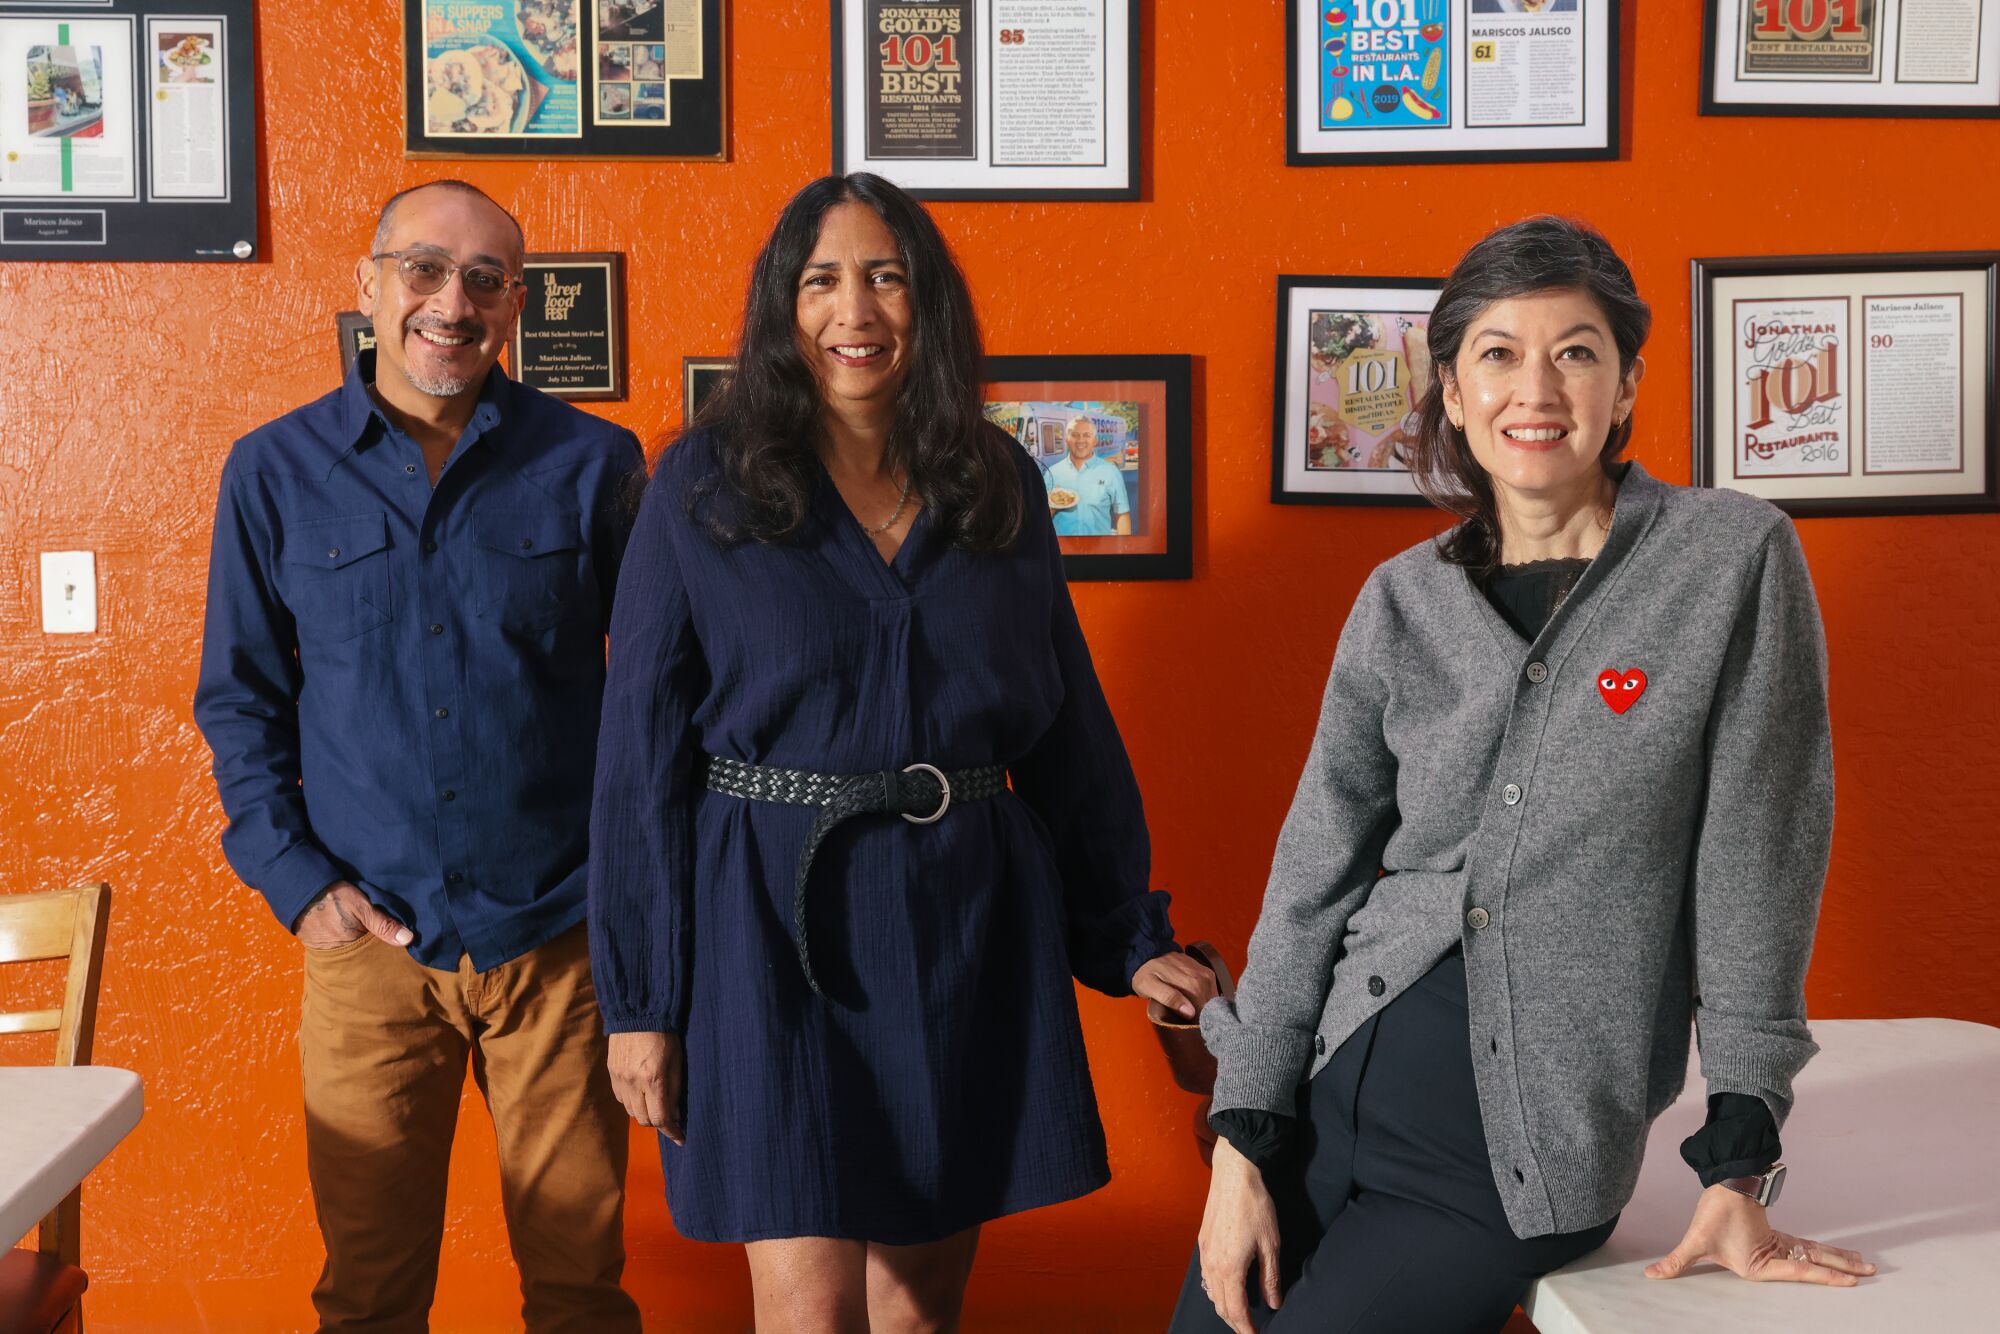 A man and two women stand before a bright orange wall that's decorated with framed restaurant reviews